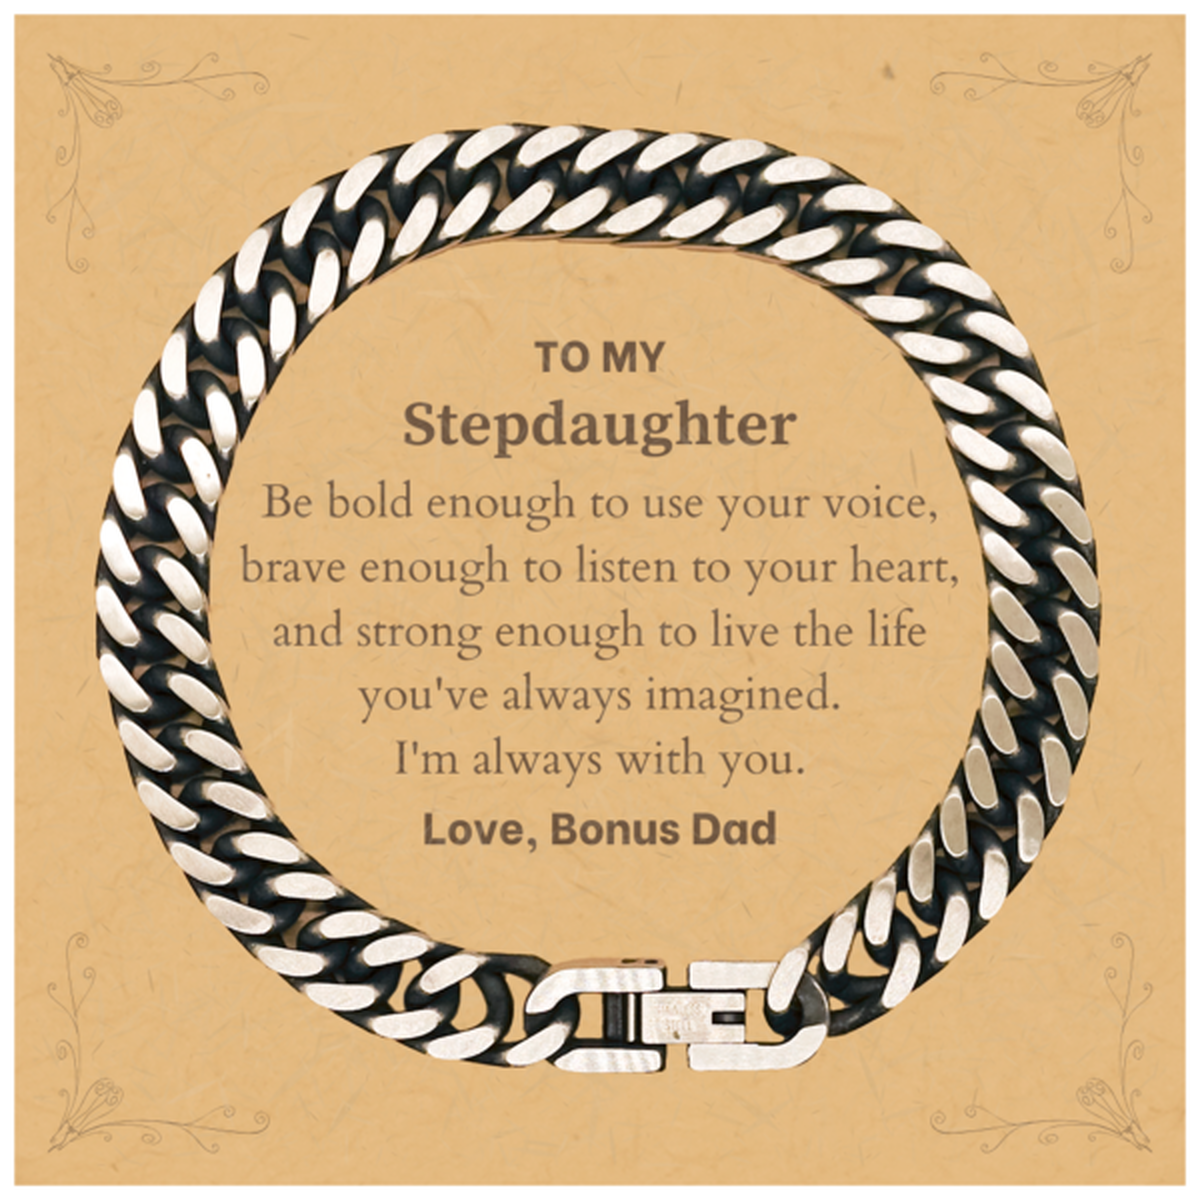 Keepsake Stepdaughter Cuban Link Chain Bracelet Gift Idea Graduation Christmas Birthday Stepdaughter from Bonus Dad, Stepdaughter Be bold enough to use your voice, brave enough to listen to your heart. Love, Bonus Dad